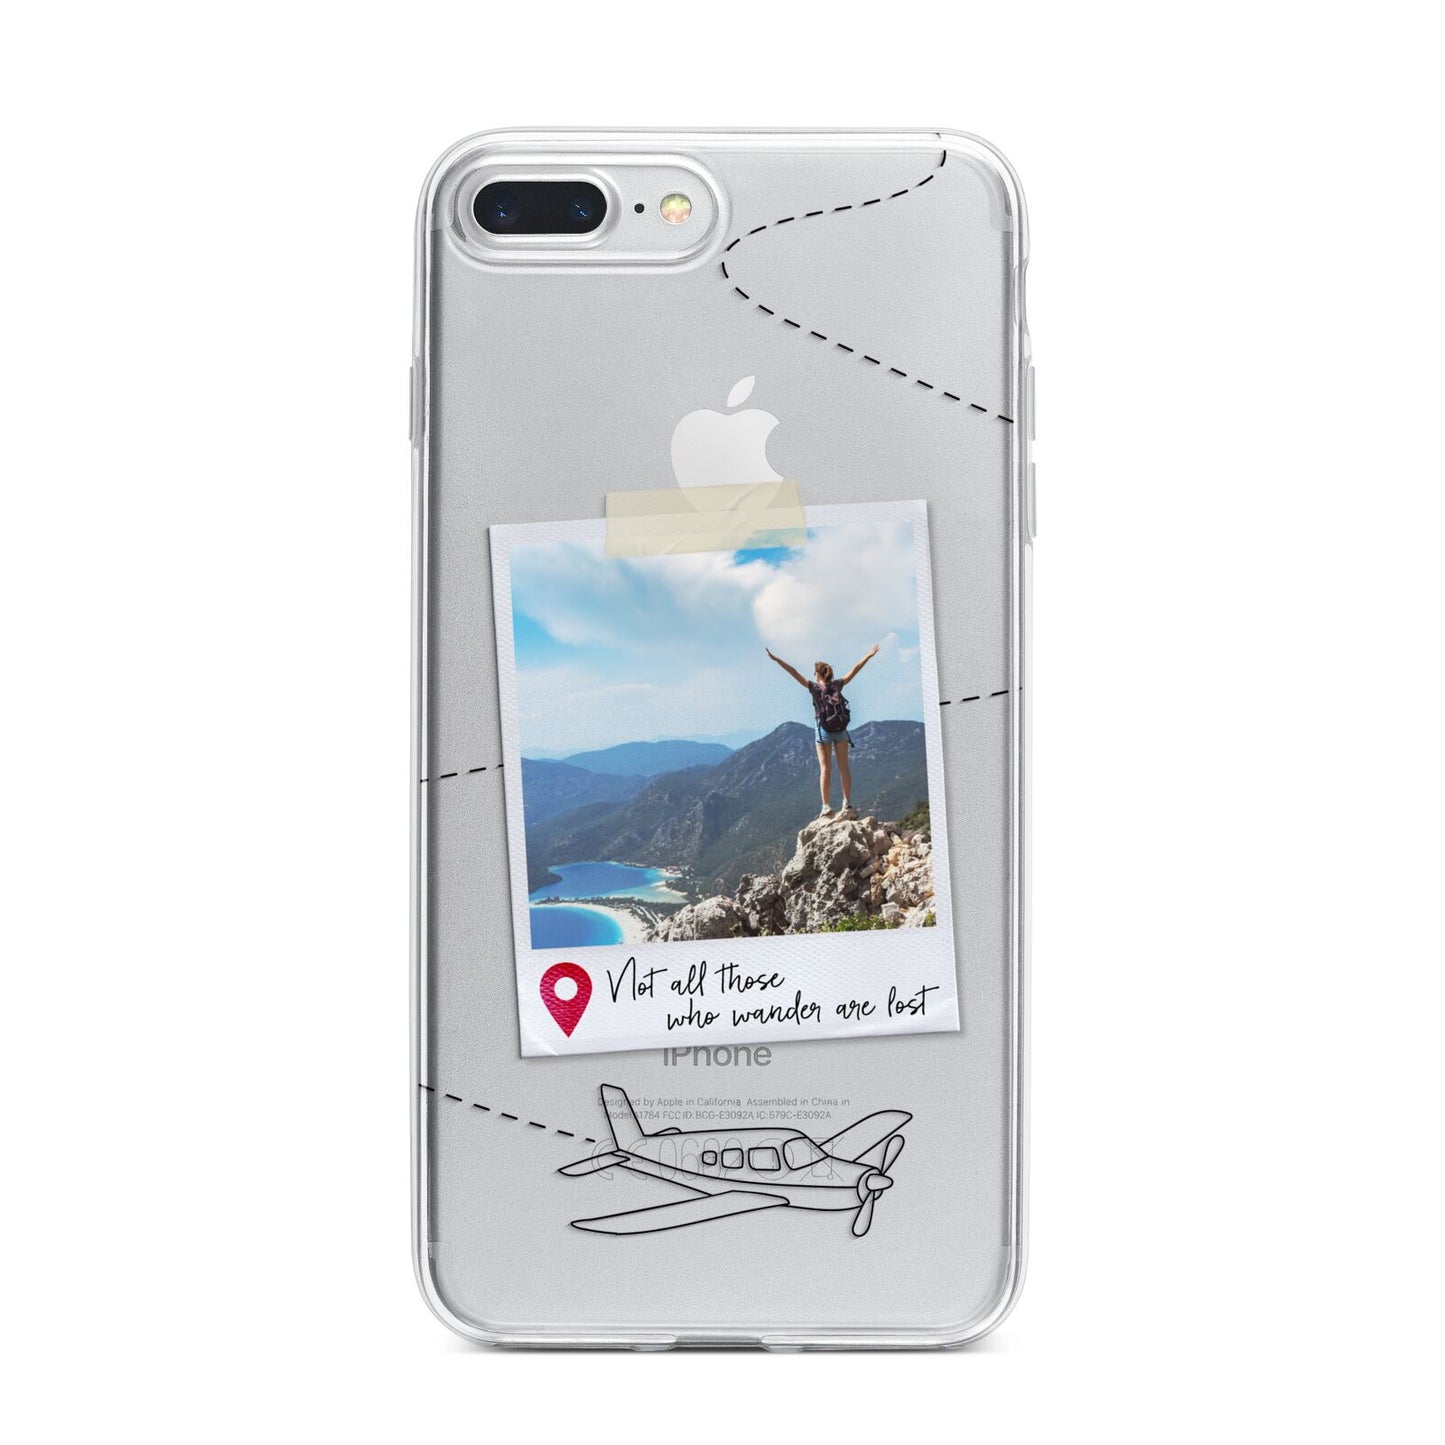 Backpacker Photo Upload Personalised iPhone 7 Plus Bumper Case on Silver iPhone